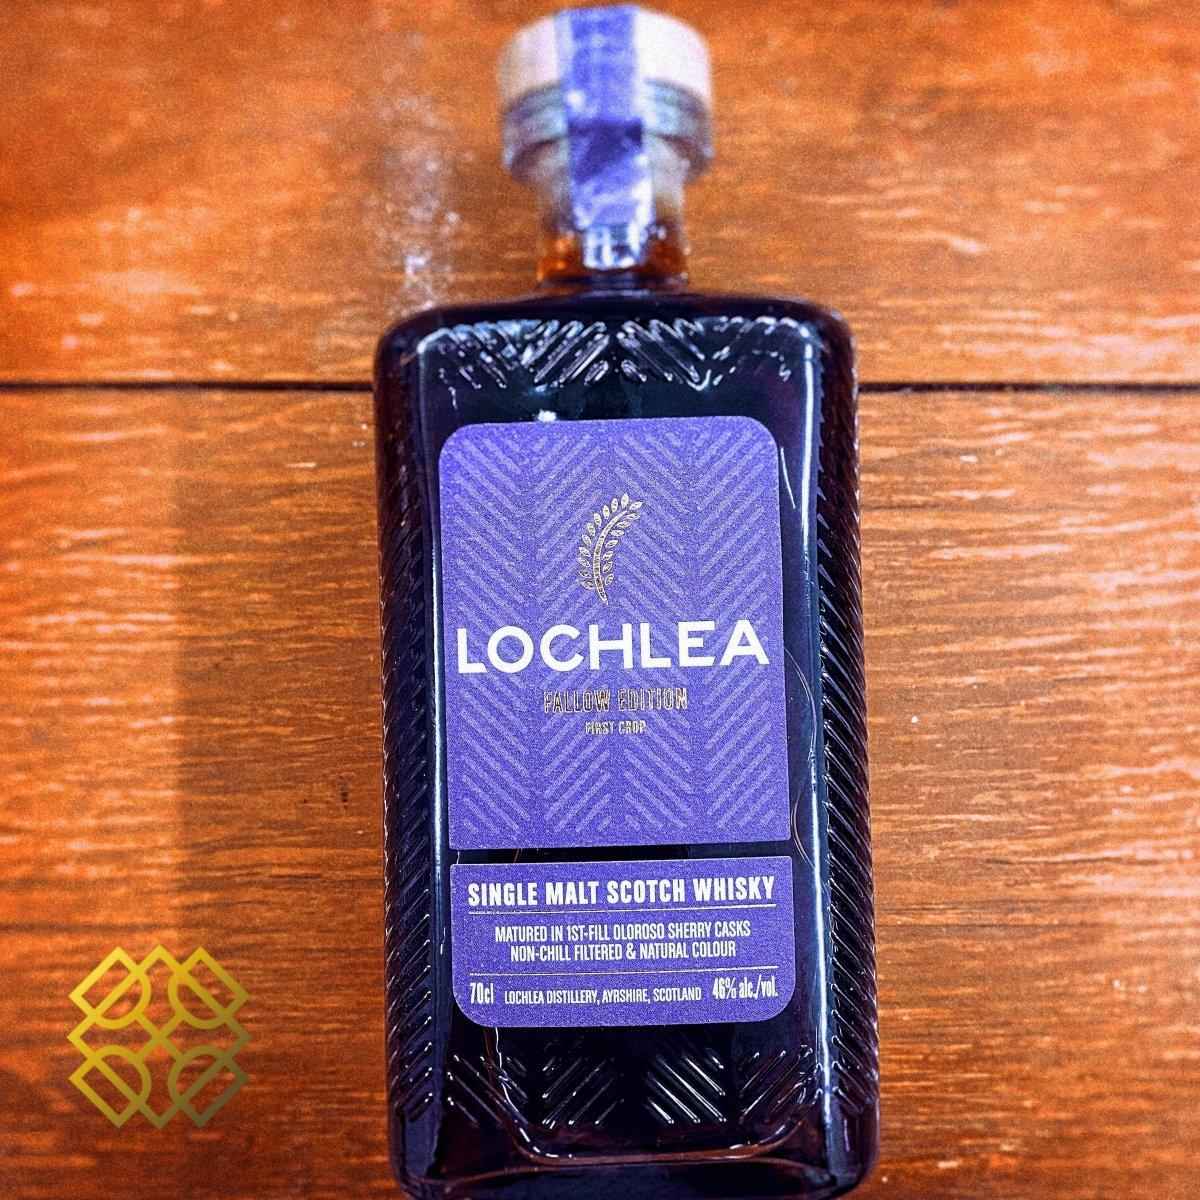 Lochlea - Fallow Edition 1st crop, 46% - Whisky